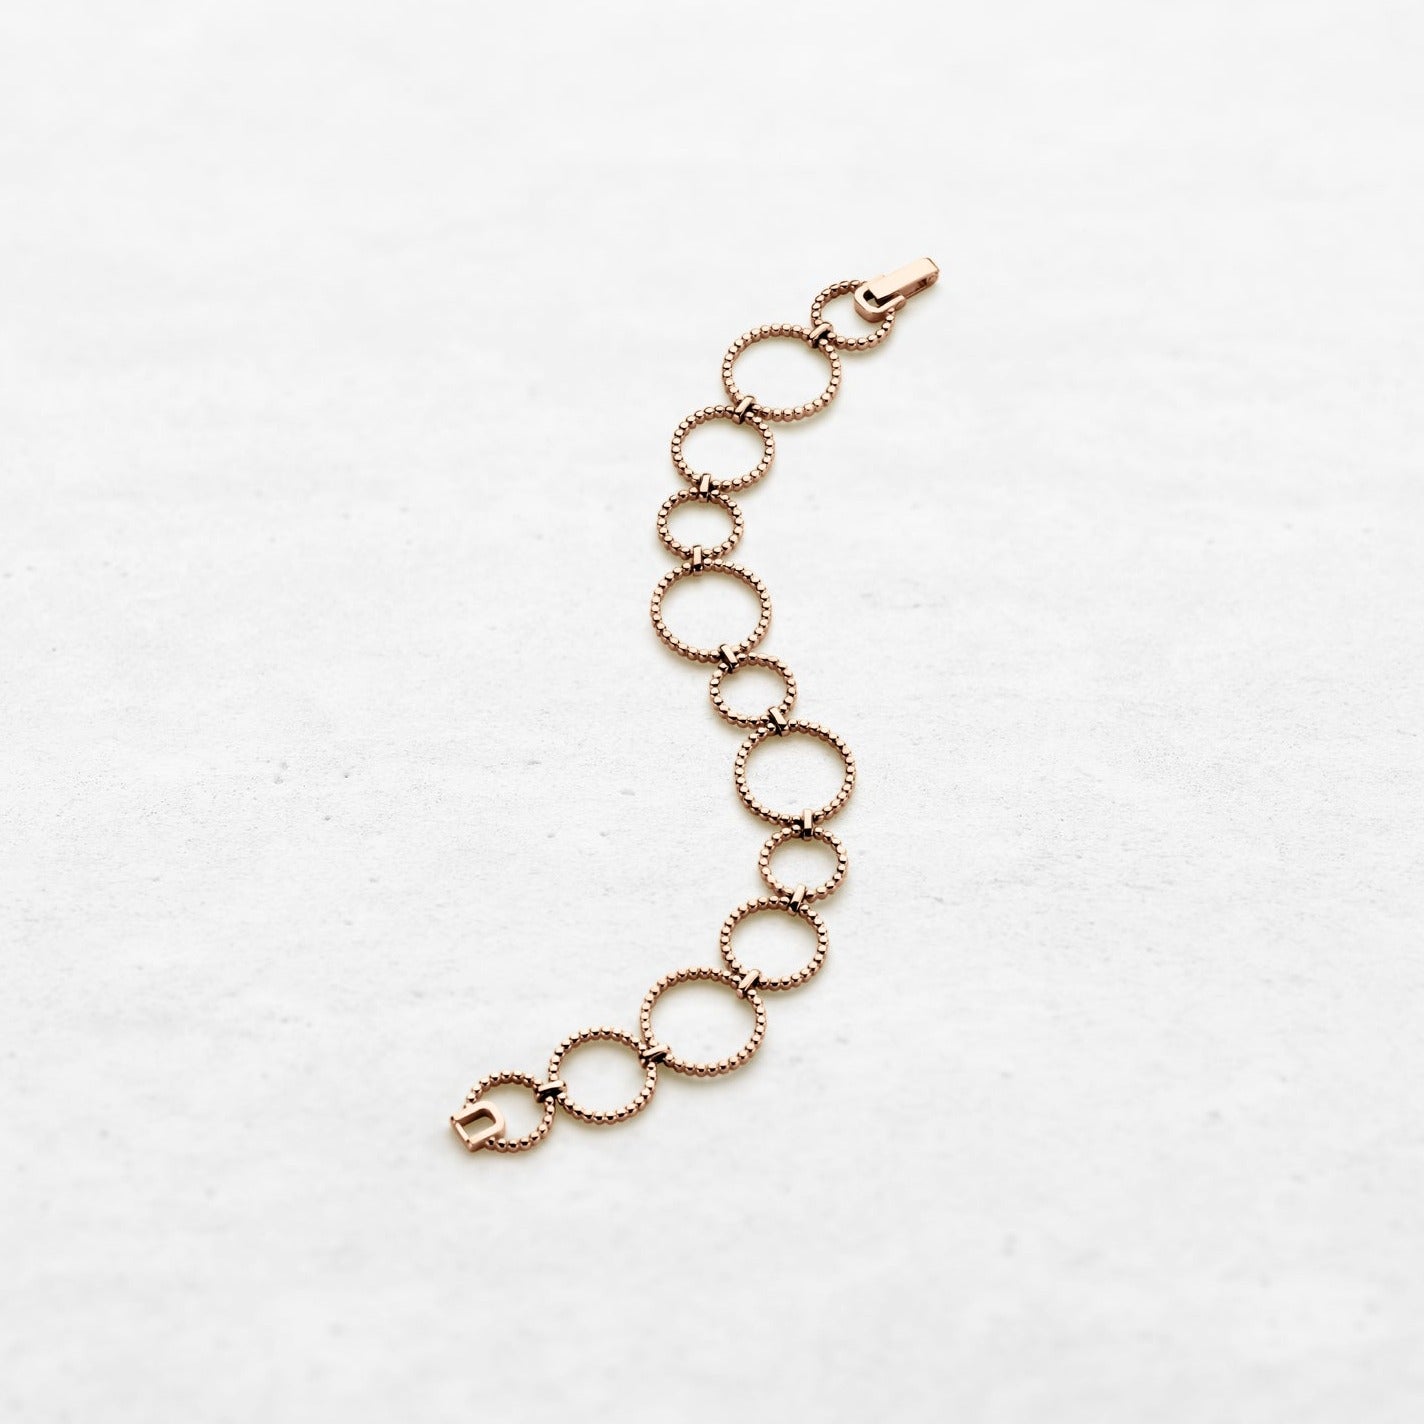 Open bracelet in different sizes of circles in rose gold made by O! Jewelry